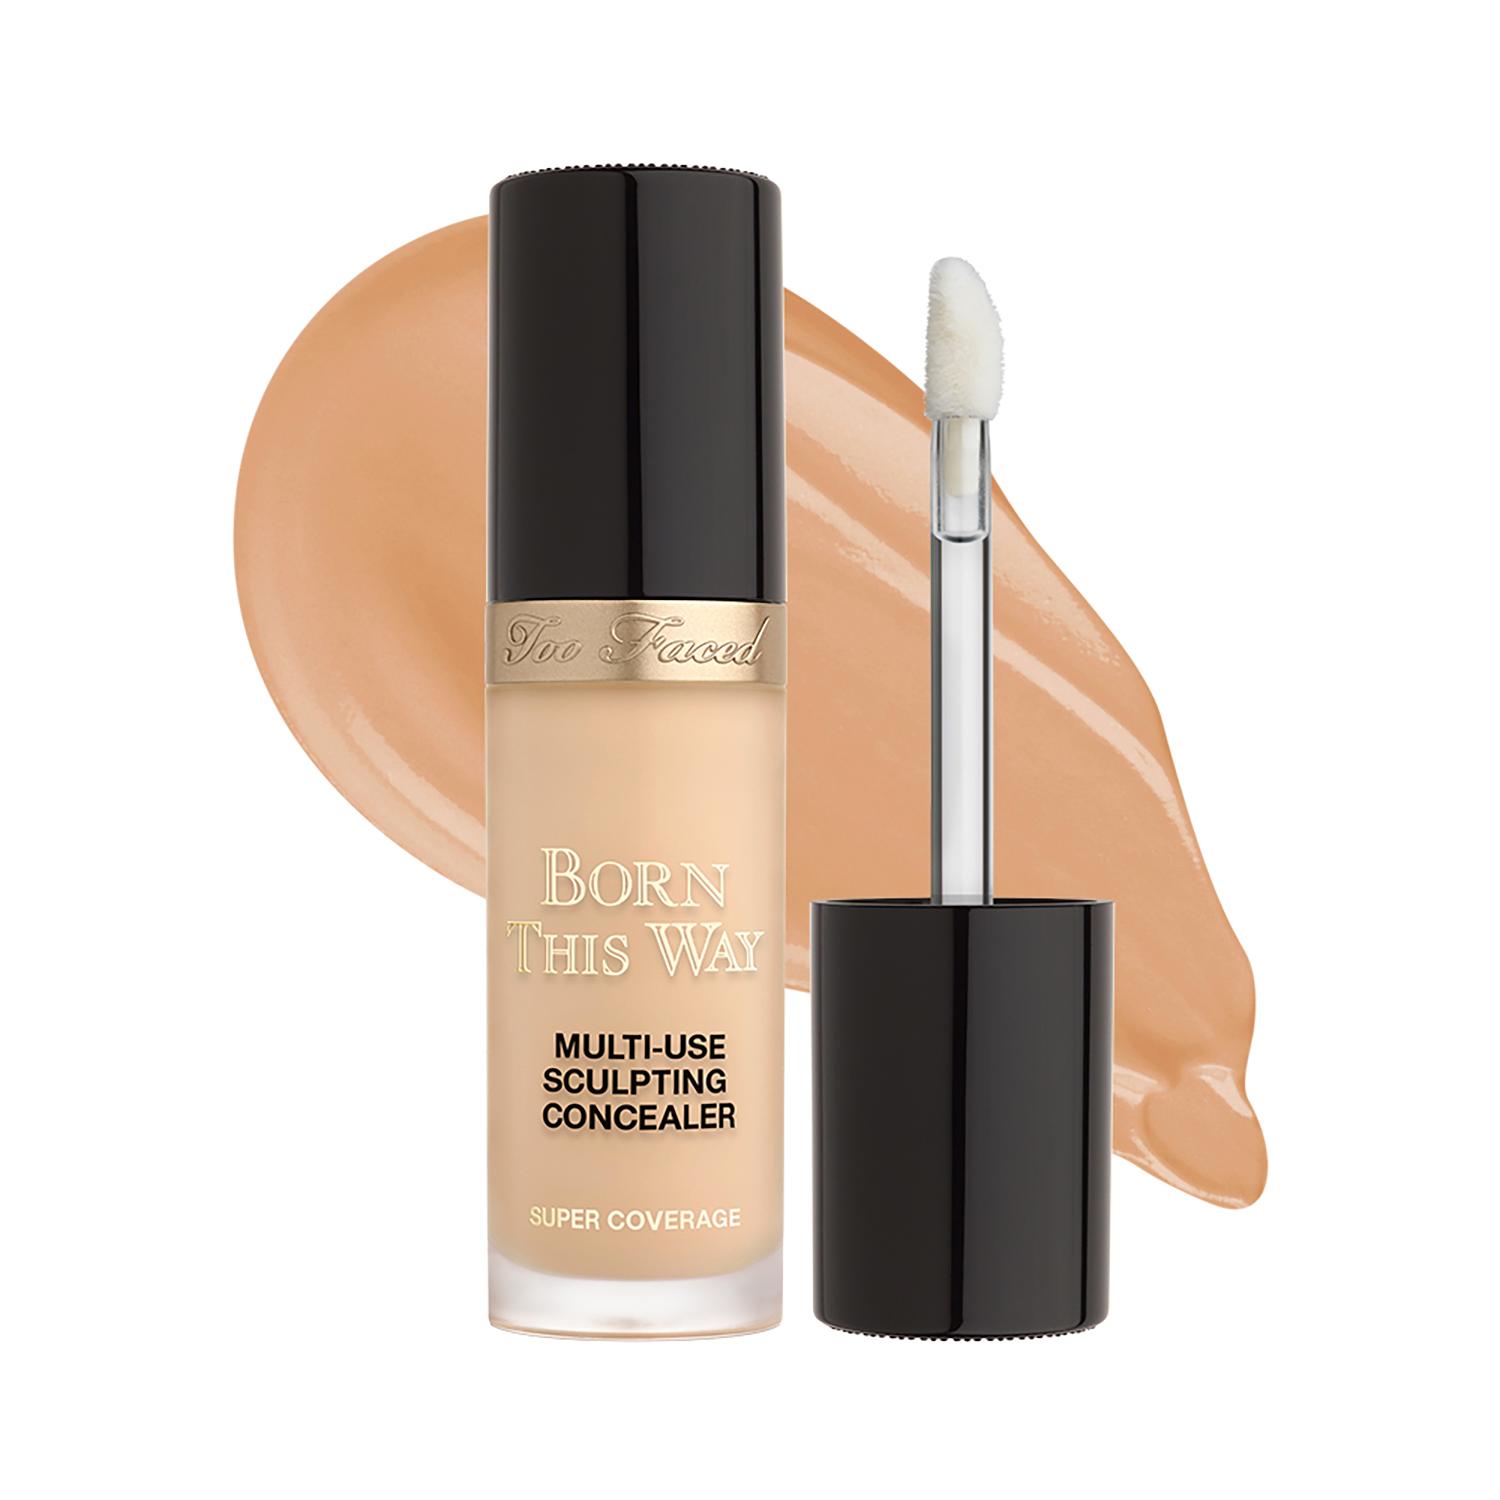 Too Faced | Too Faced Born This Way Super Coverage Multi Use Sculpting Concealer- Natural Beige (13.5ml)